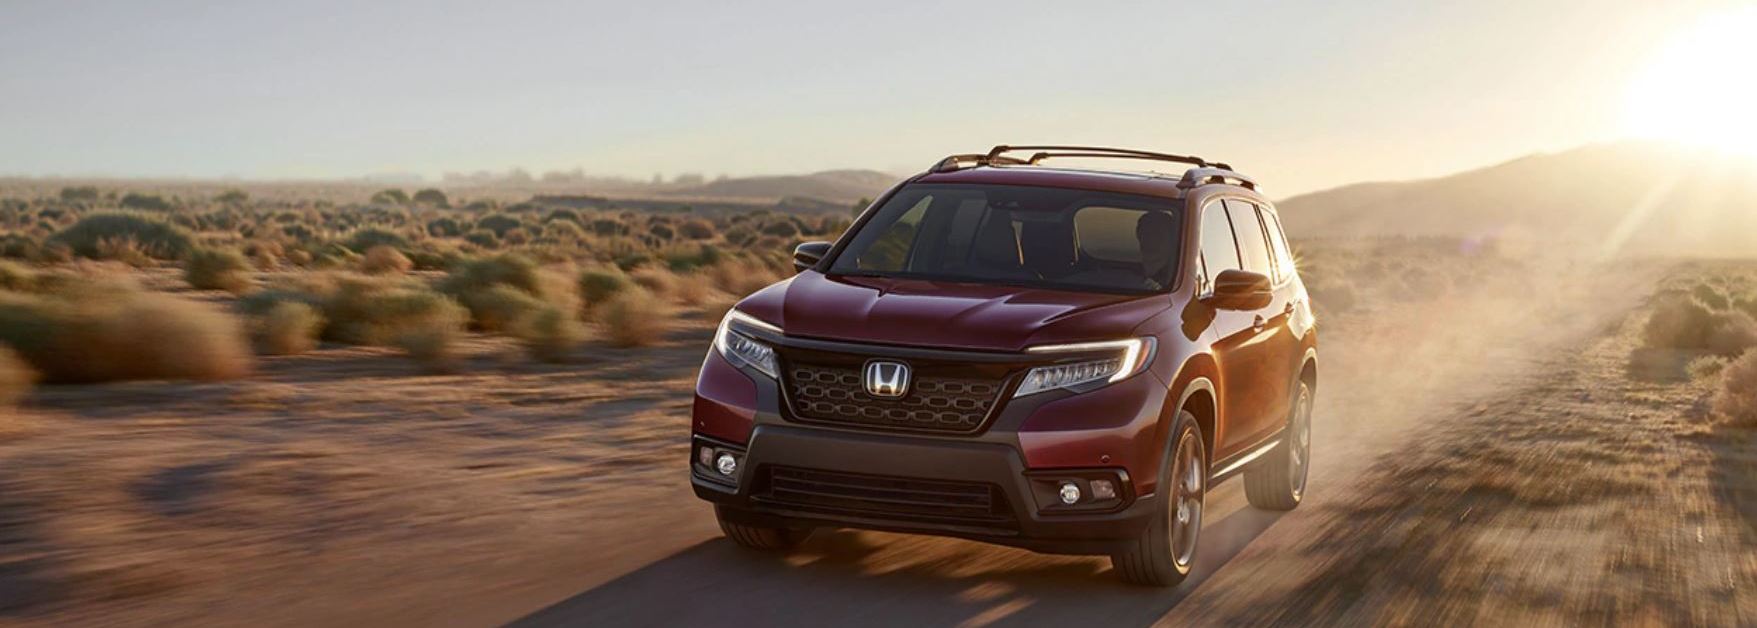 Used Honda Passport For Sale Near Bowie Md